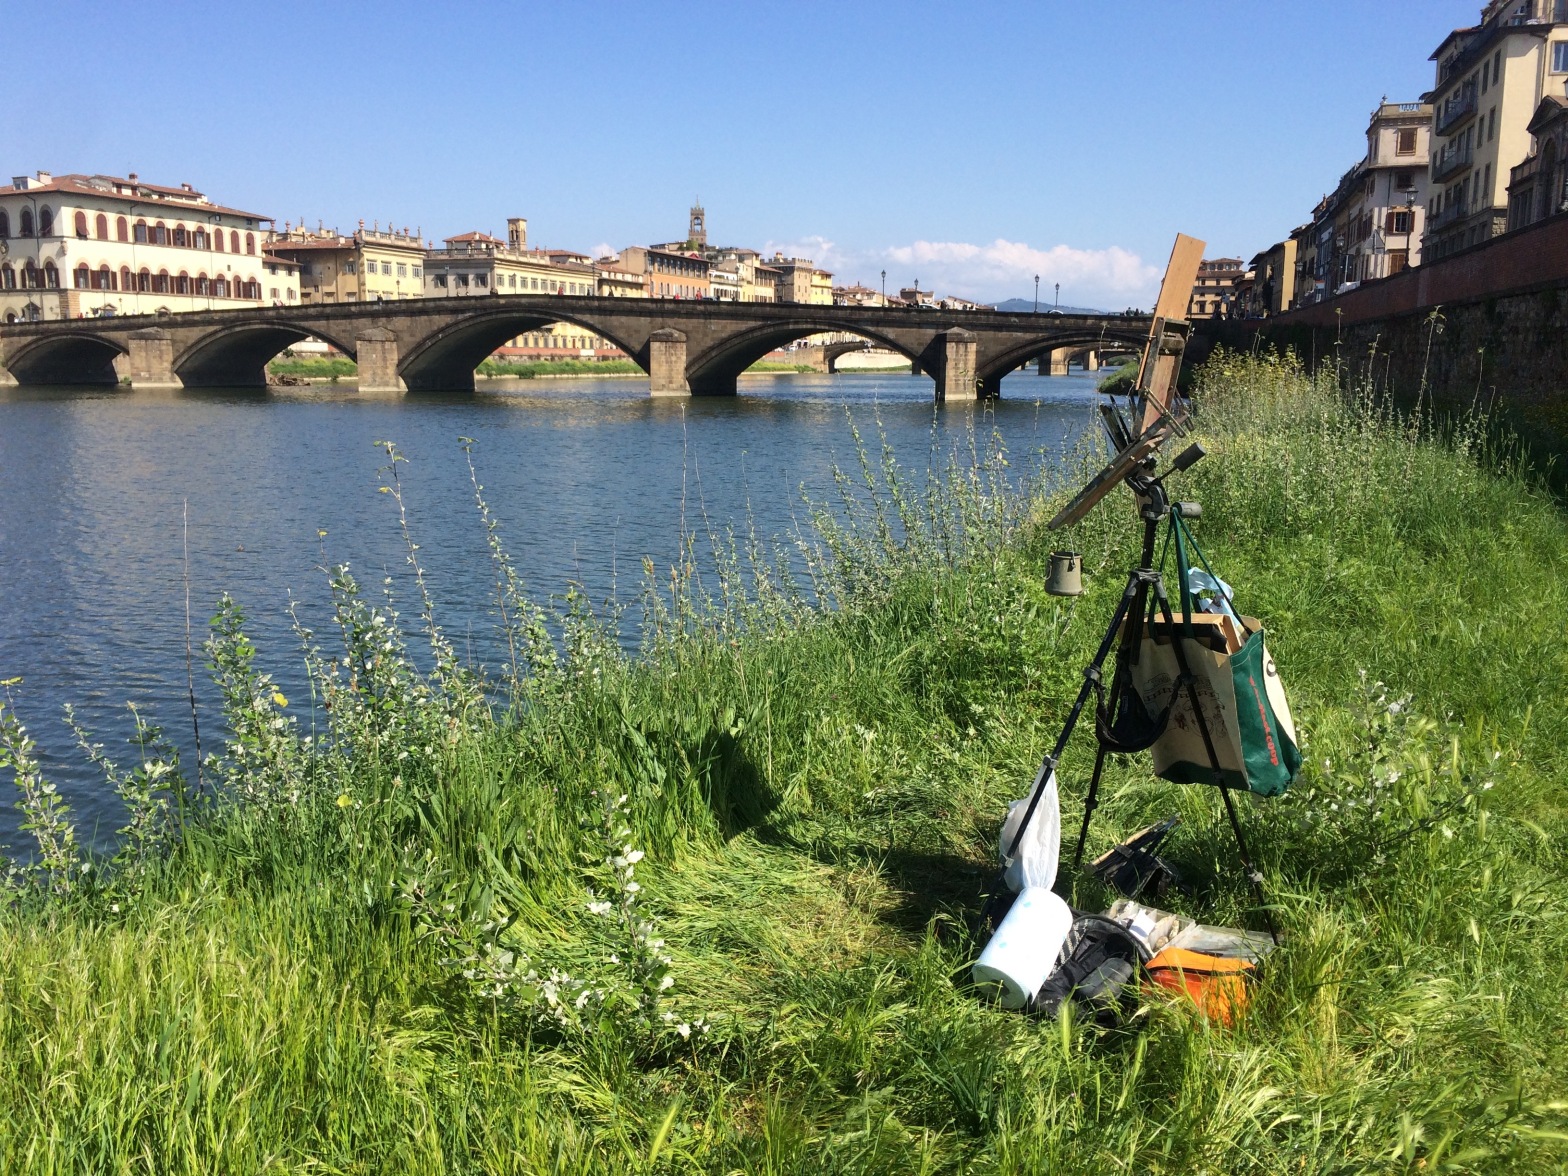 Plein air painting setup on the Arno River in Florence.